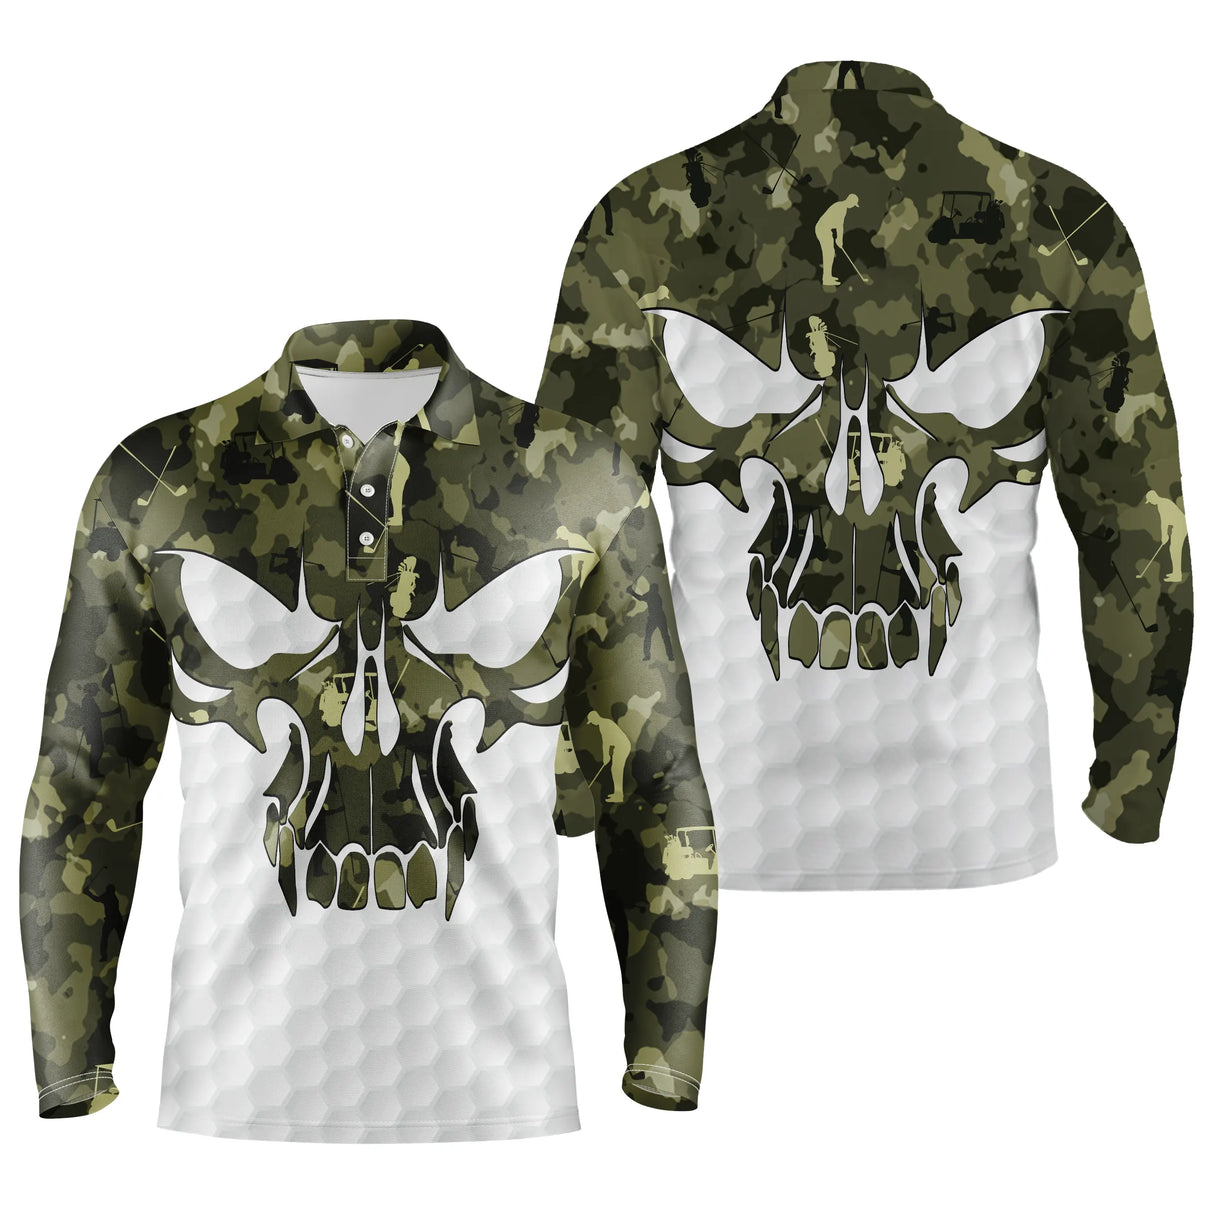 Chiptshirts - Golf Polo Shirt, Original Gift for Golf Fans, Men's and Women's Sports Polo Shirt, Golf Camouflage, Golf Skull - CTS26052232